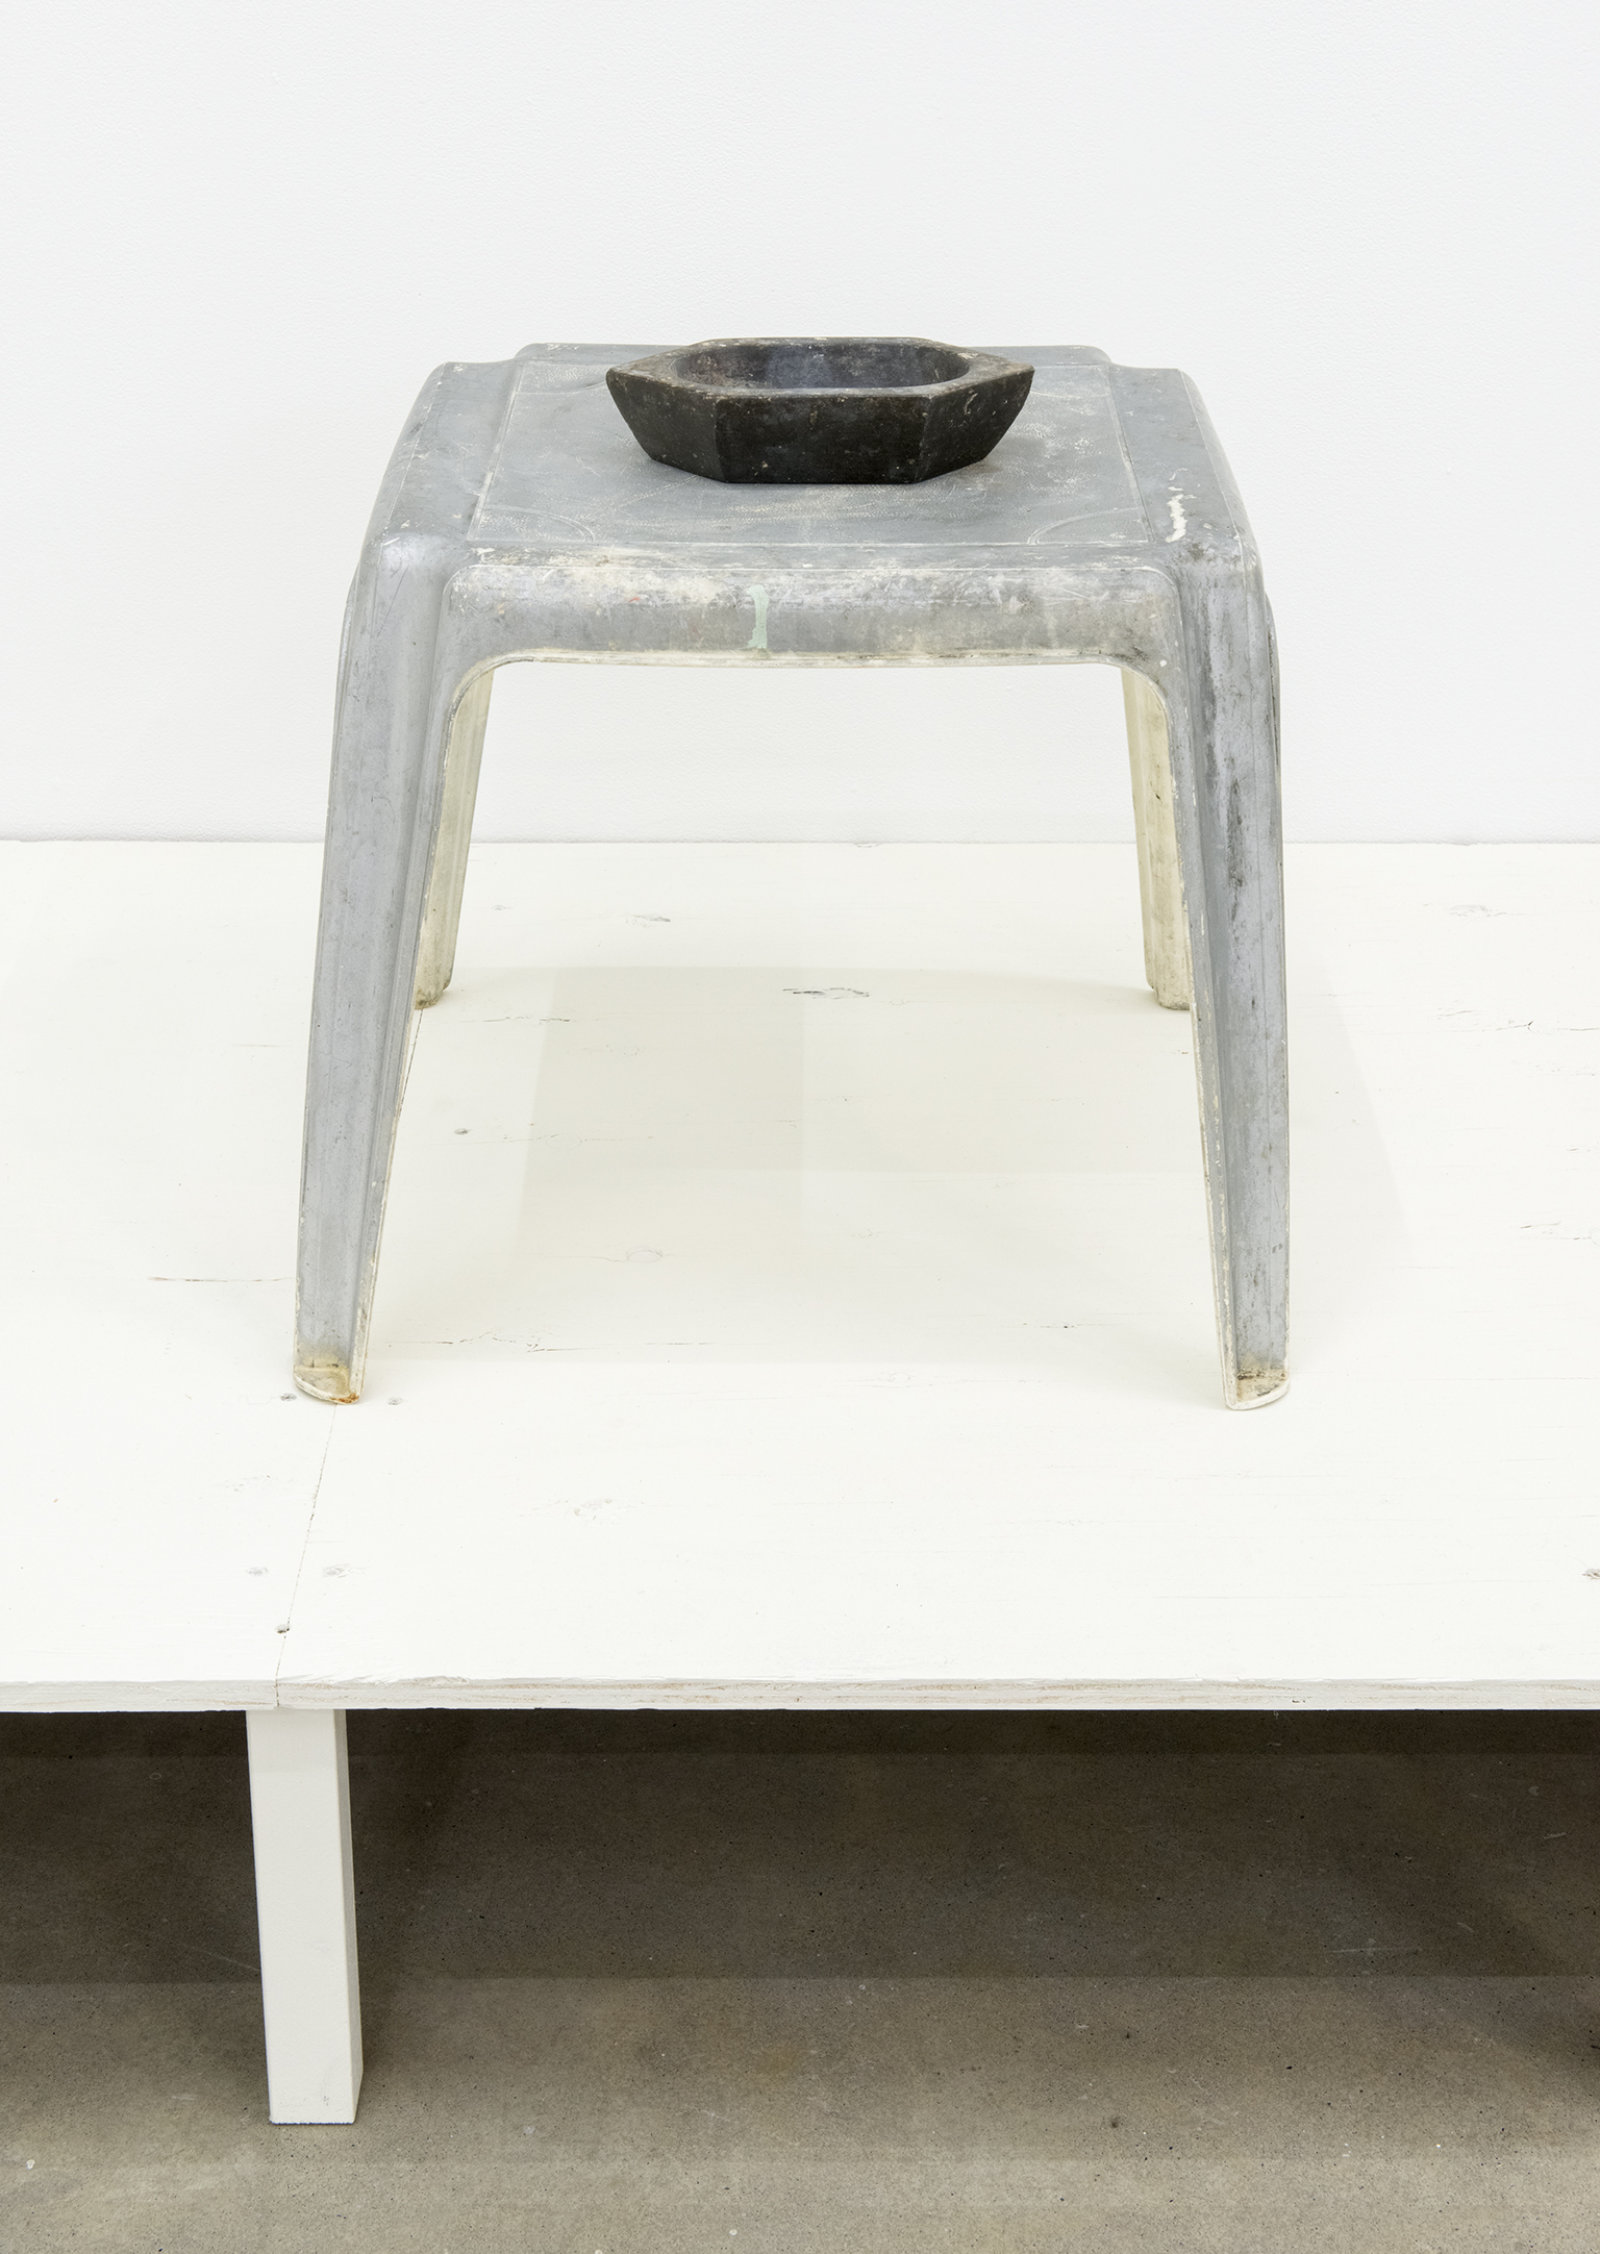 Ashes Withyman, E2 PP 05, 2013, plastic, paint, carved stone, 18 x 17 x 17 in. (46 x 43 x 43 cm)  